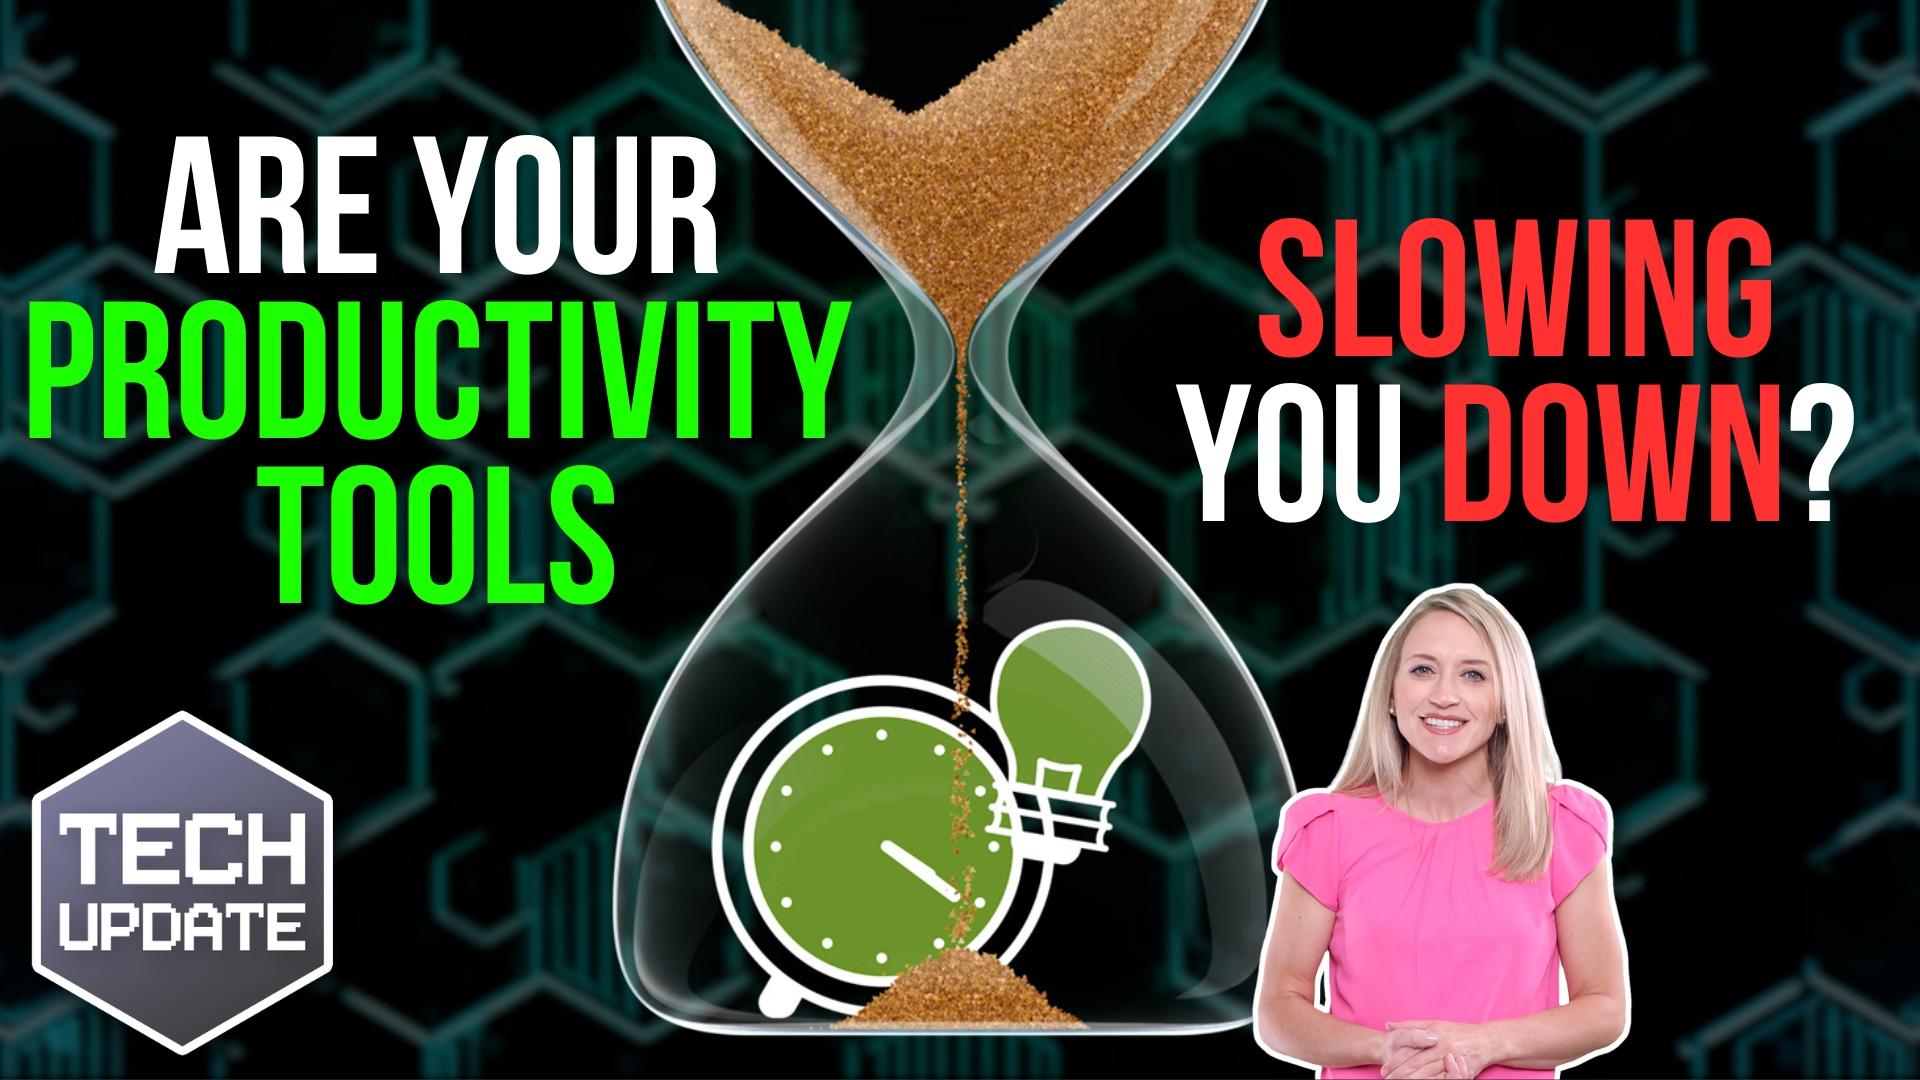 Product Are your productivity tools actually slowing you down? - AVLA.net image